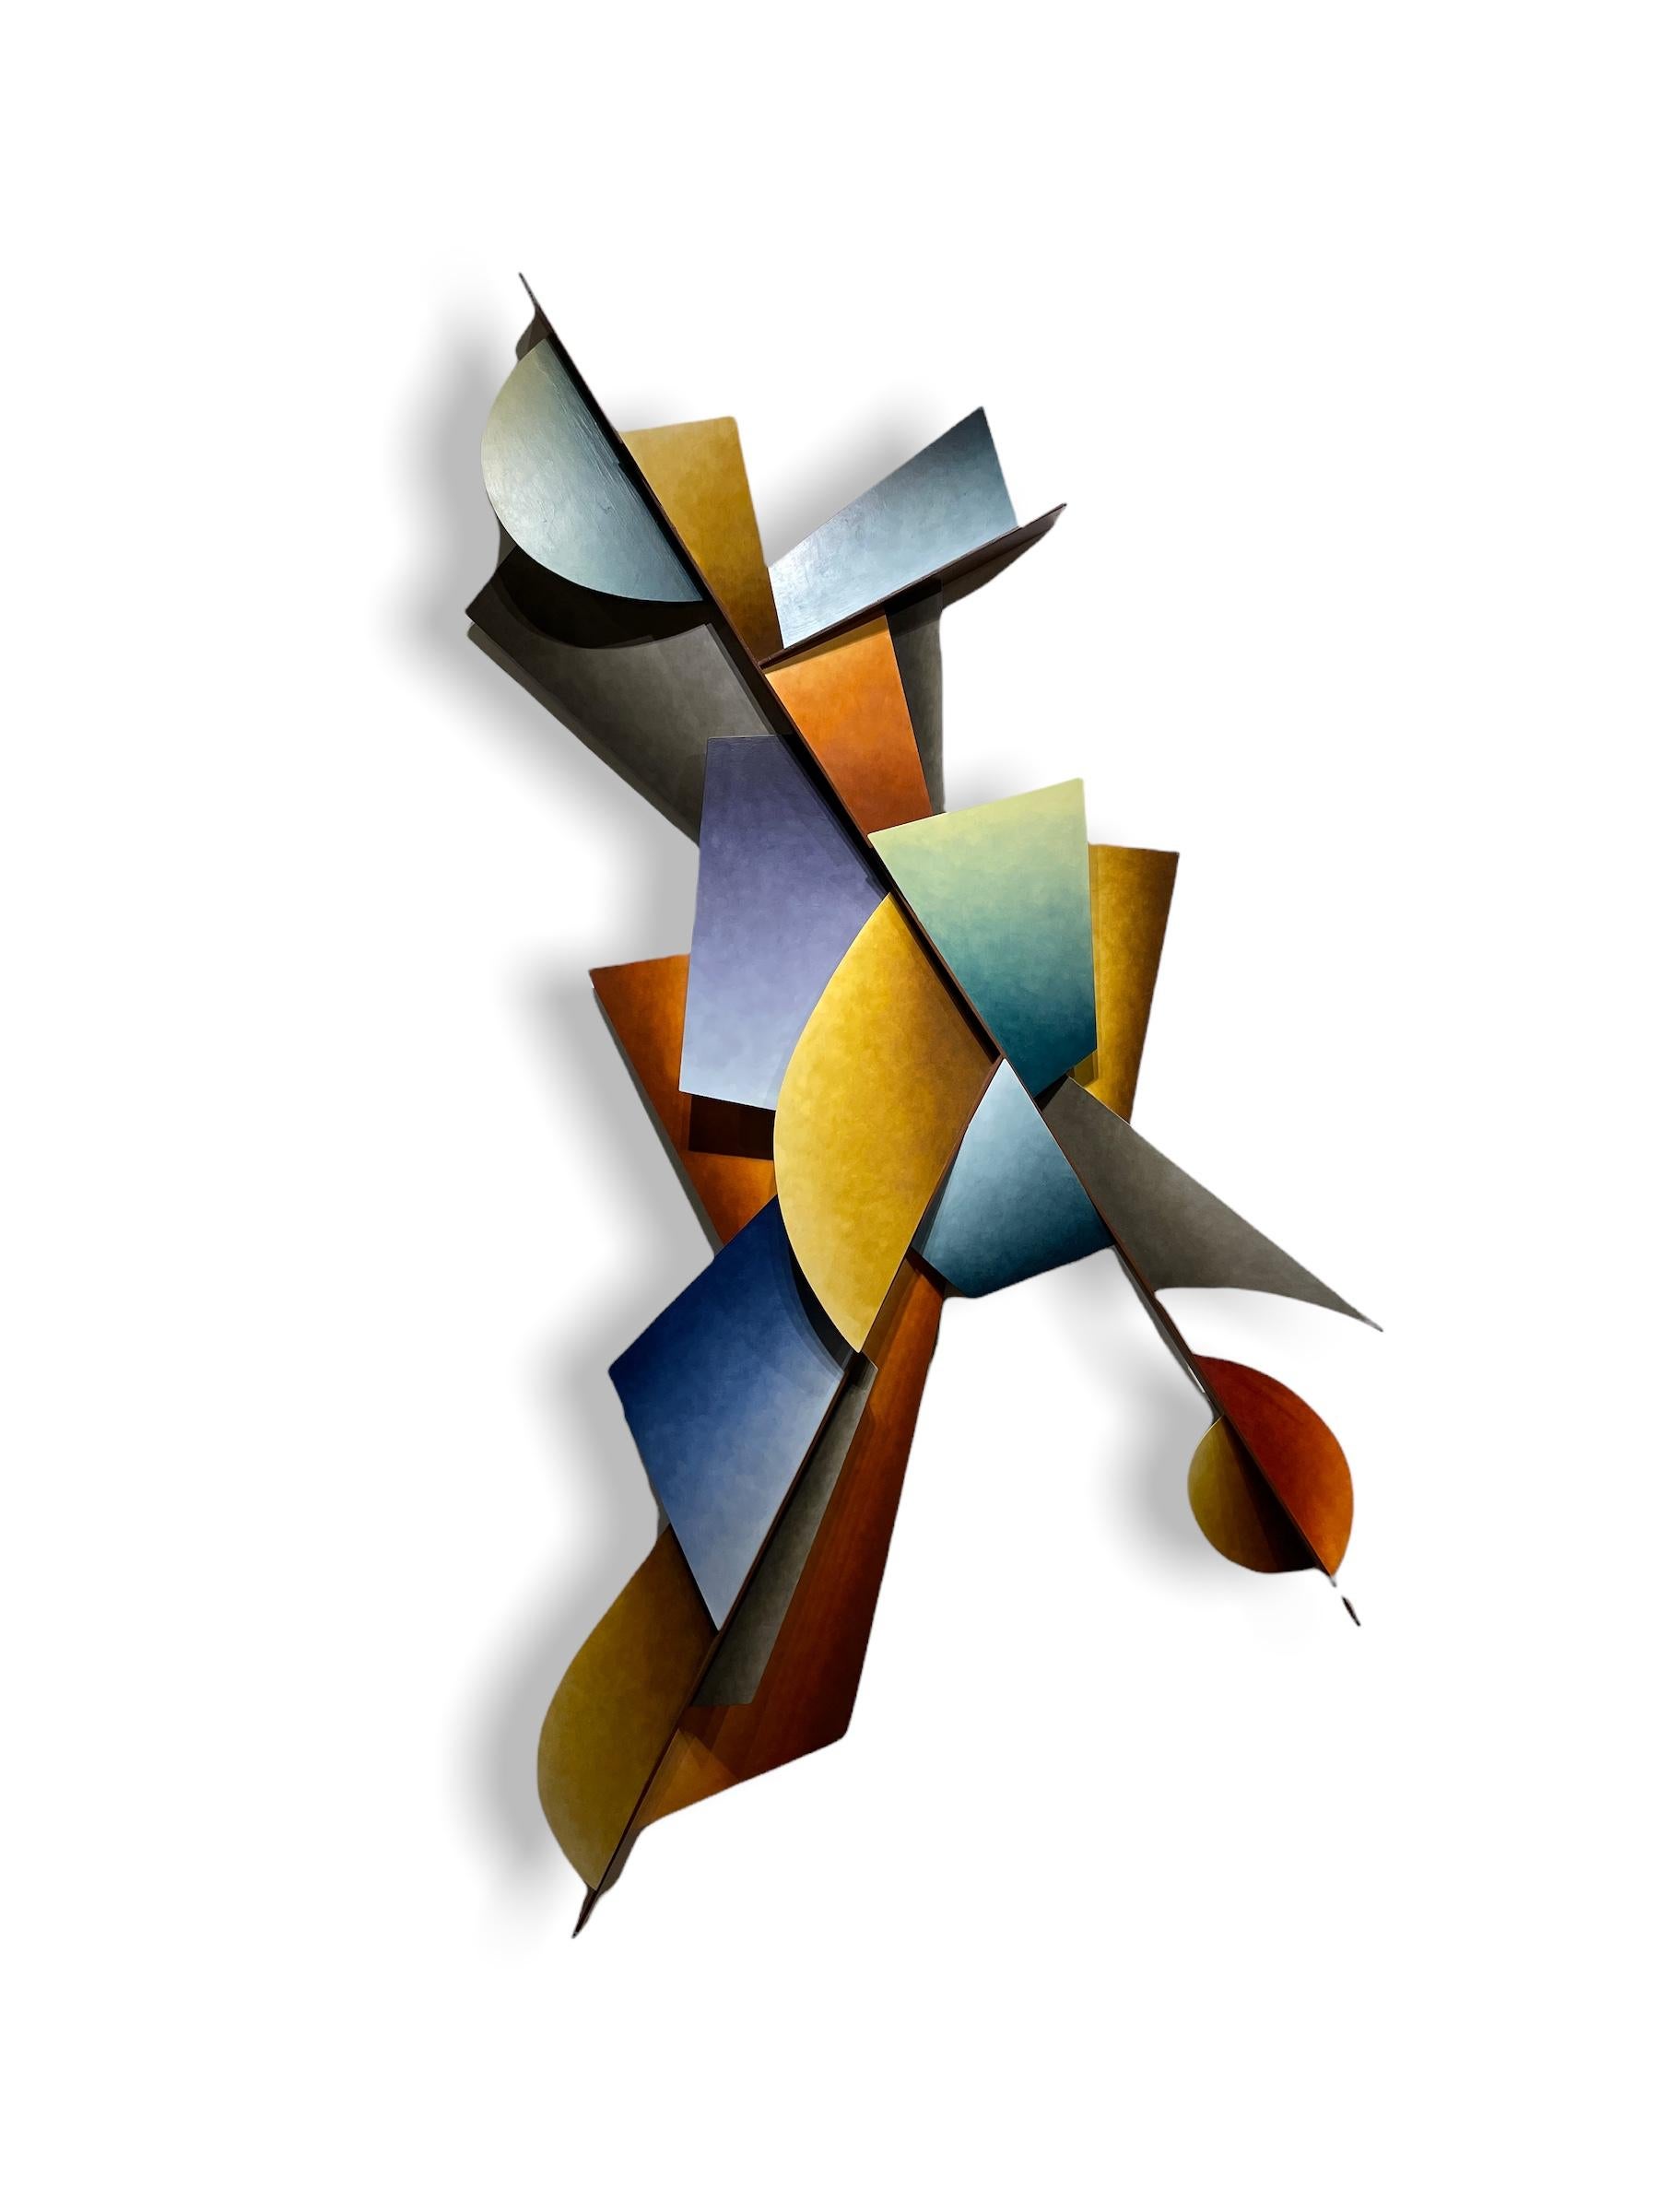 Shifting Winds - Three Dimensional Steel Wall Sculpture, Linear Geometric Form - Mixed Media Art by Chris Hill